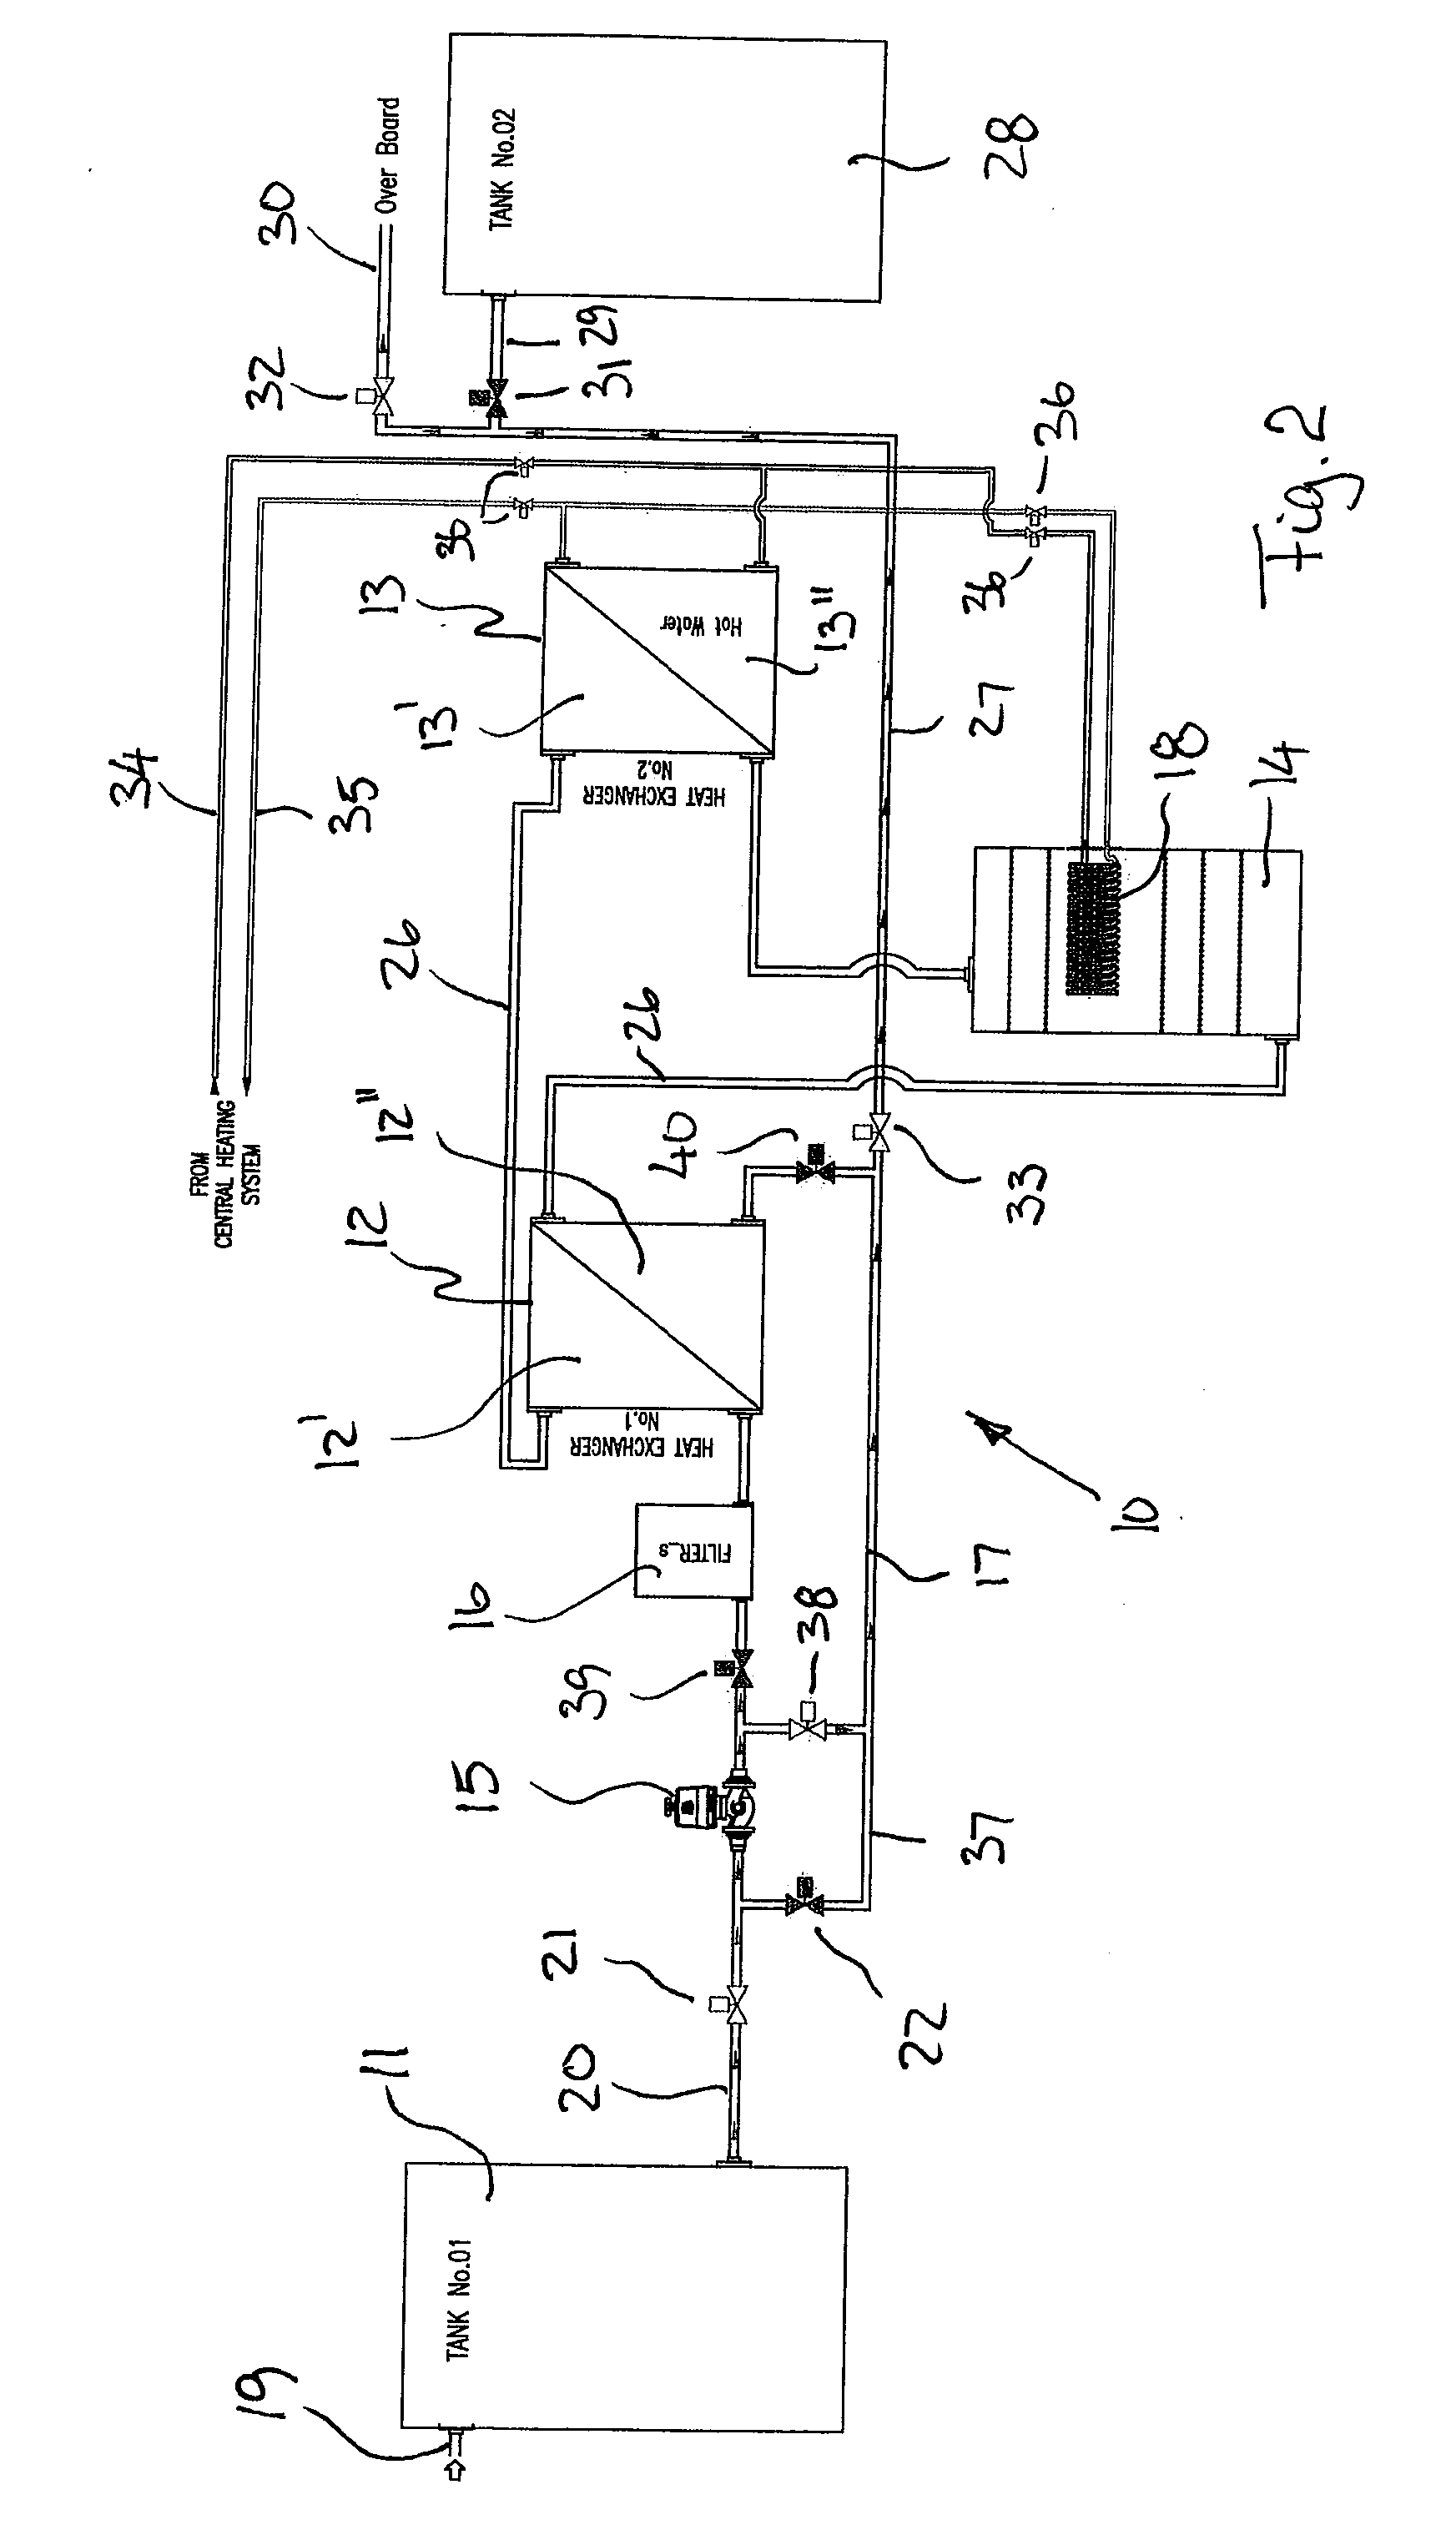 Method and system for treating water inboard a vessel